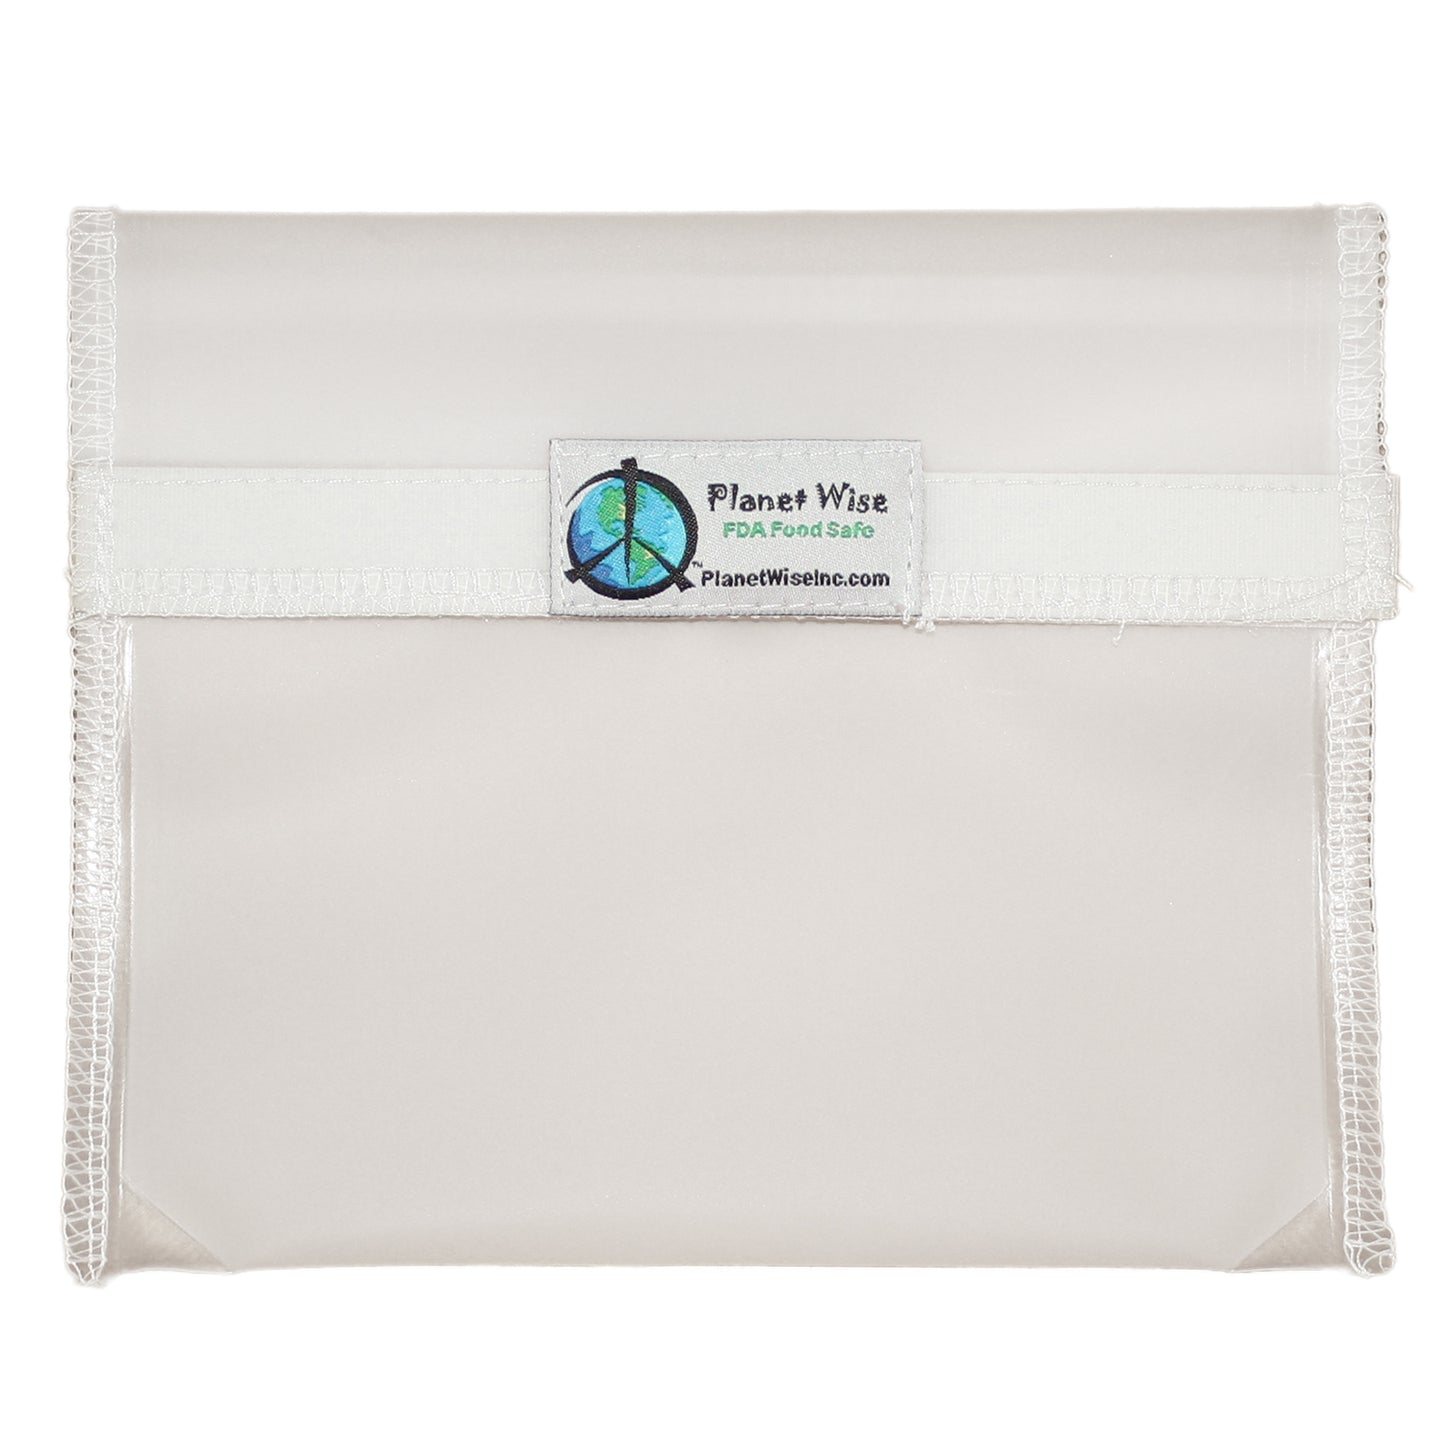 Planet Wise Sandwich Bag Set of 3 - Clear